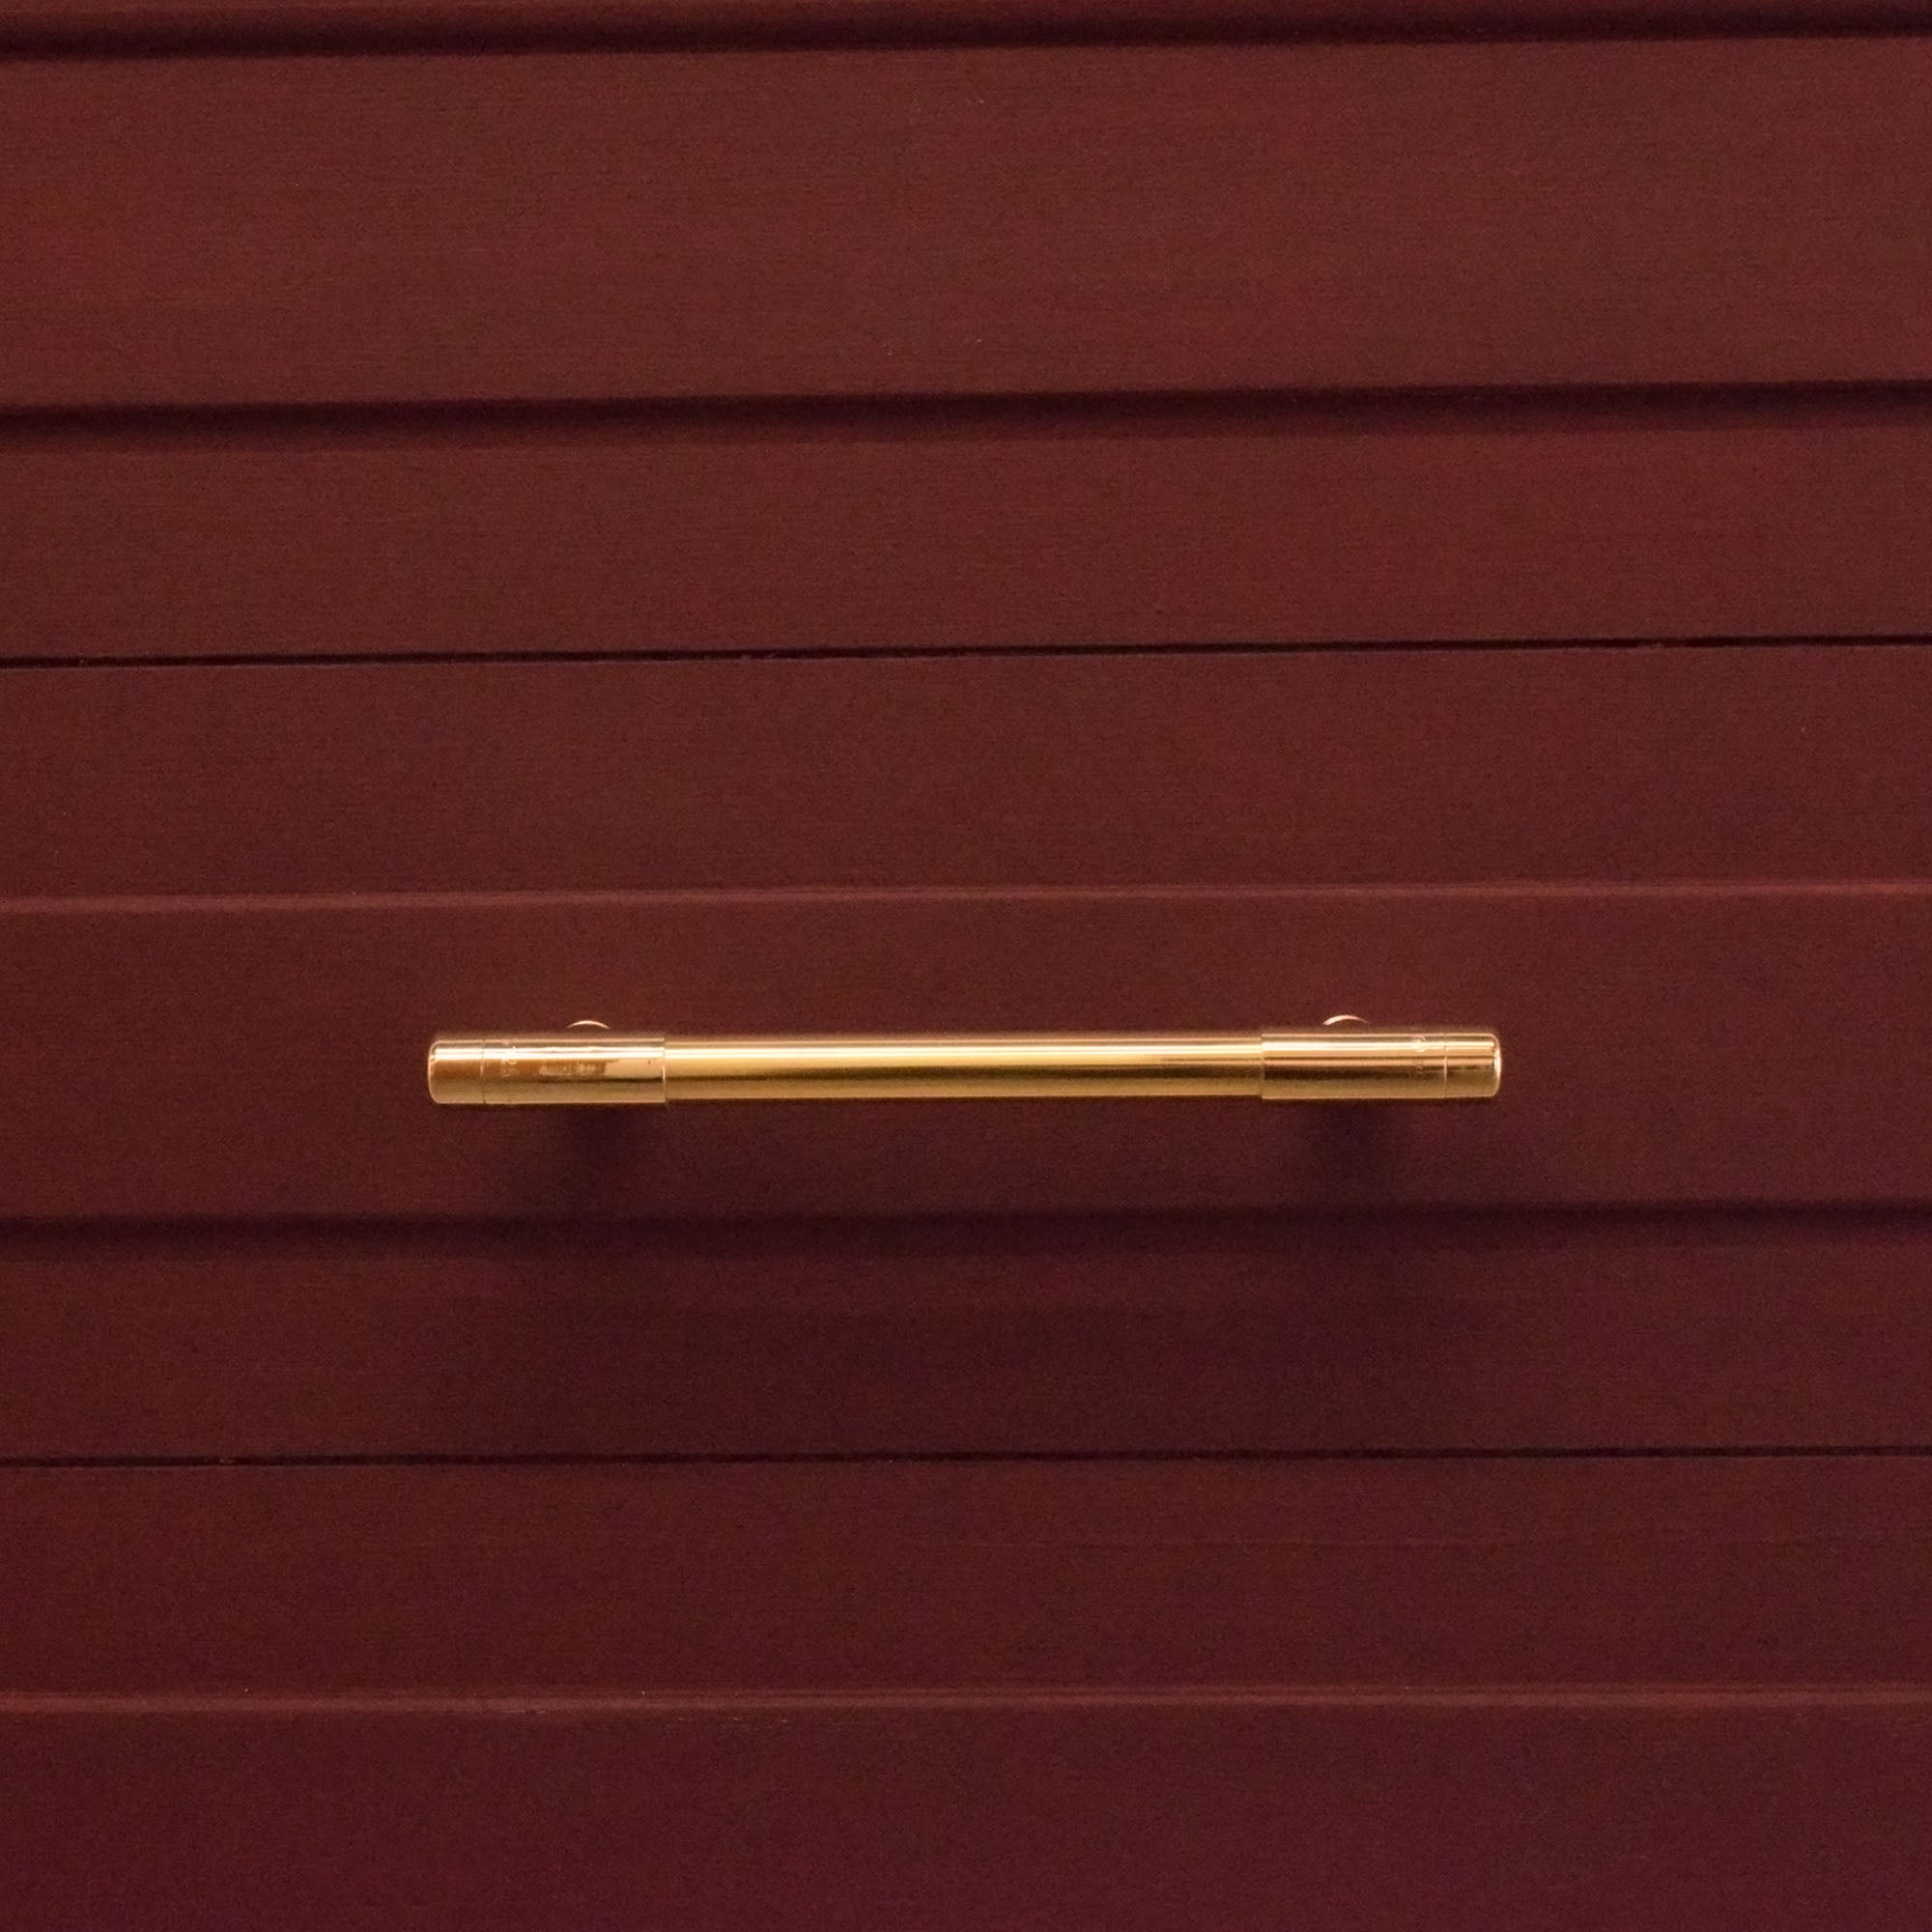 Satin High Polish Brass T-Shaped Pull Handle on red drawers